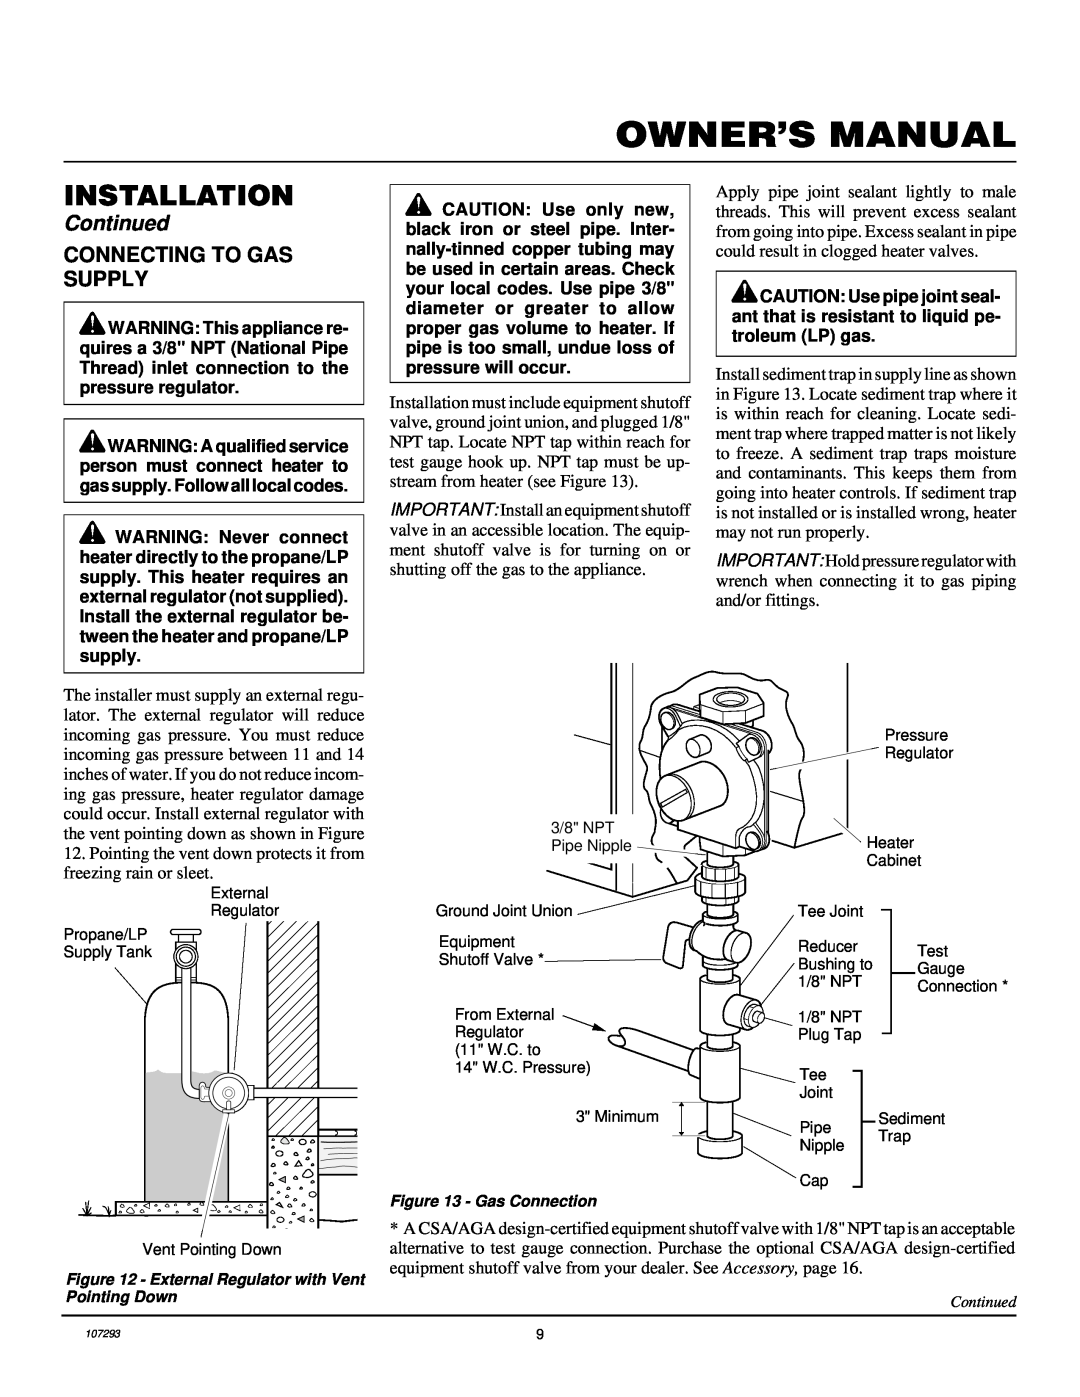 Desa CGR2P installation manual Installation, Continued, Connecting To Gas Supply, Gas Connection 